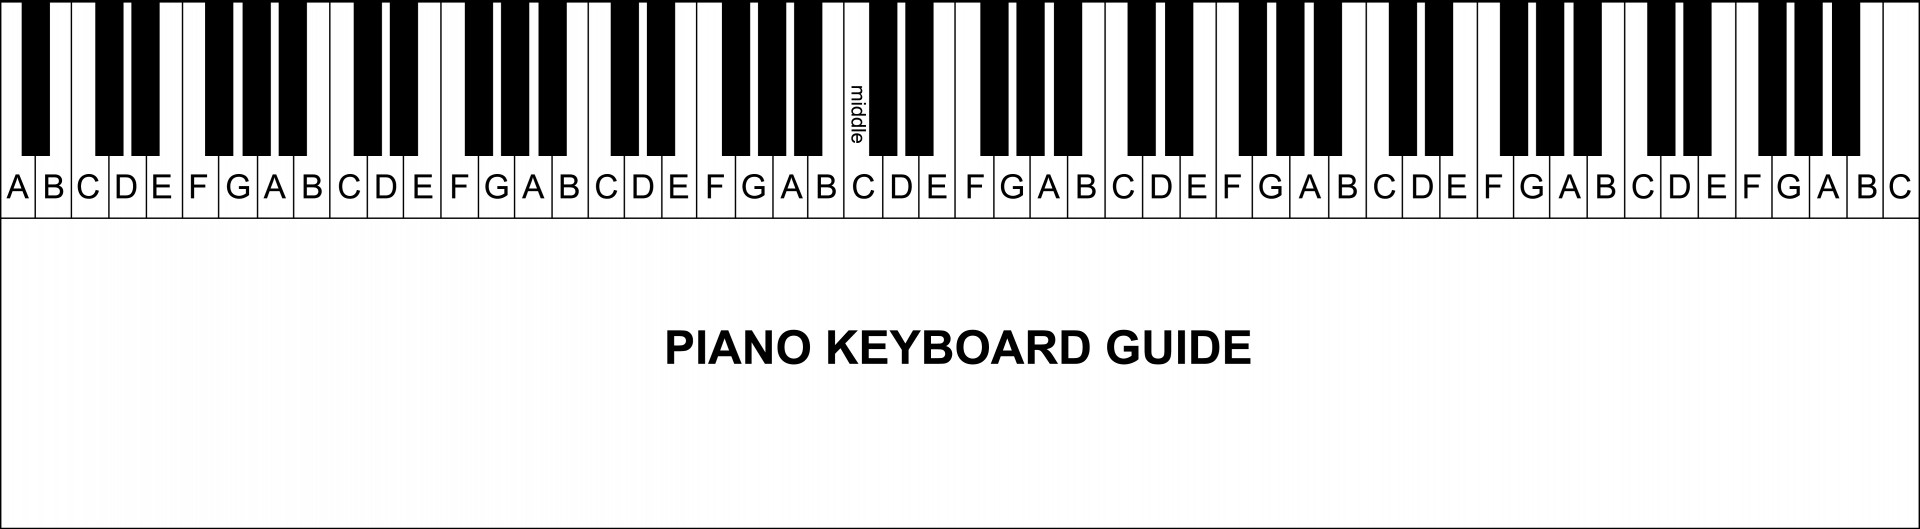 Piano Keyboard Guide Clipart Free Stock Photo - Public Domain Pictures